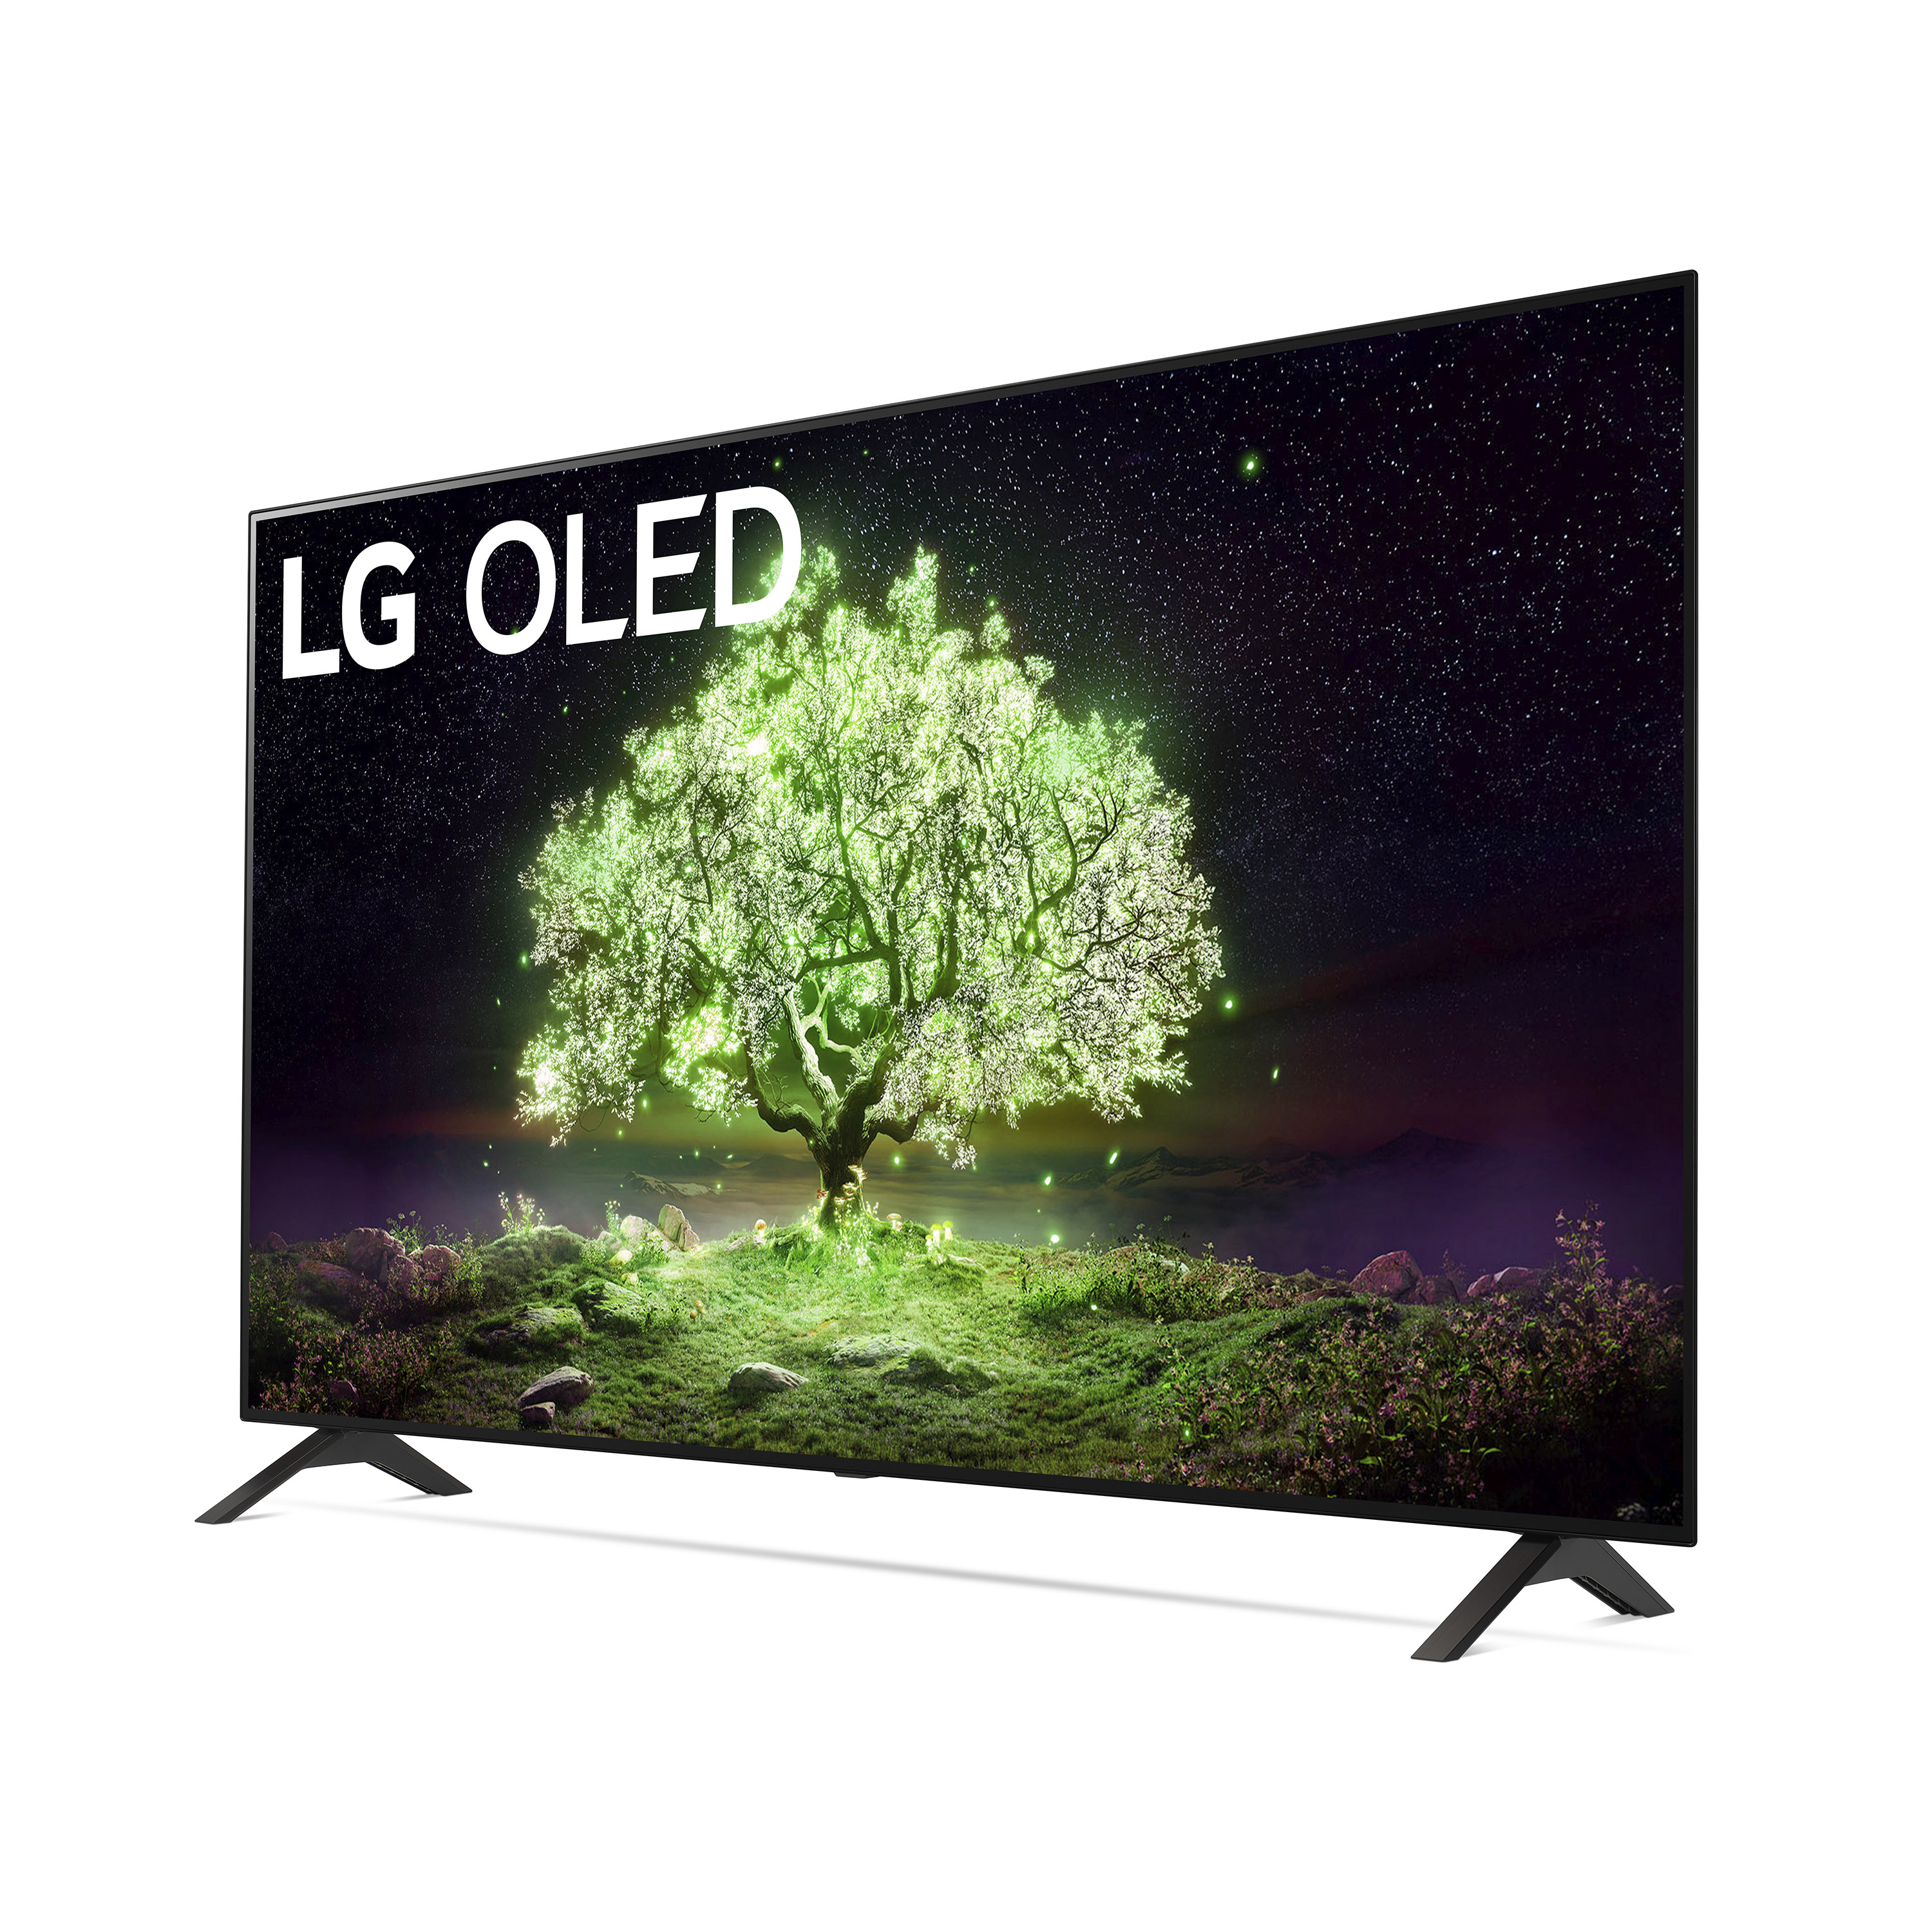 LG 48" Class 4K UHD 2160P OLED Smart TV with HDR, OLED48A1PUA - image 6 of 25